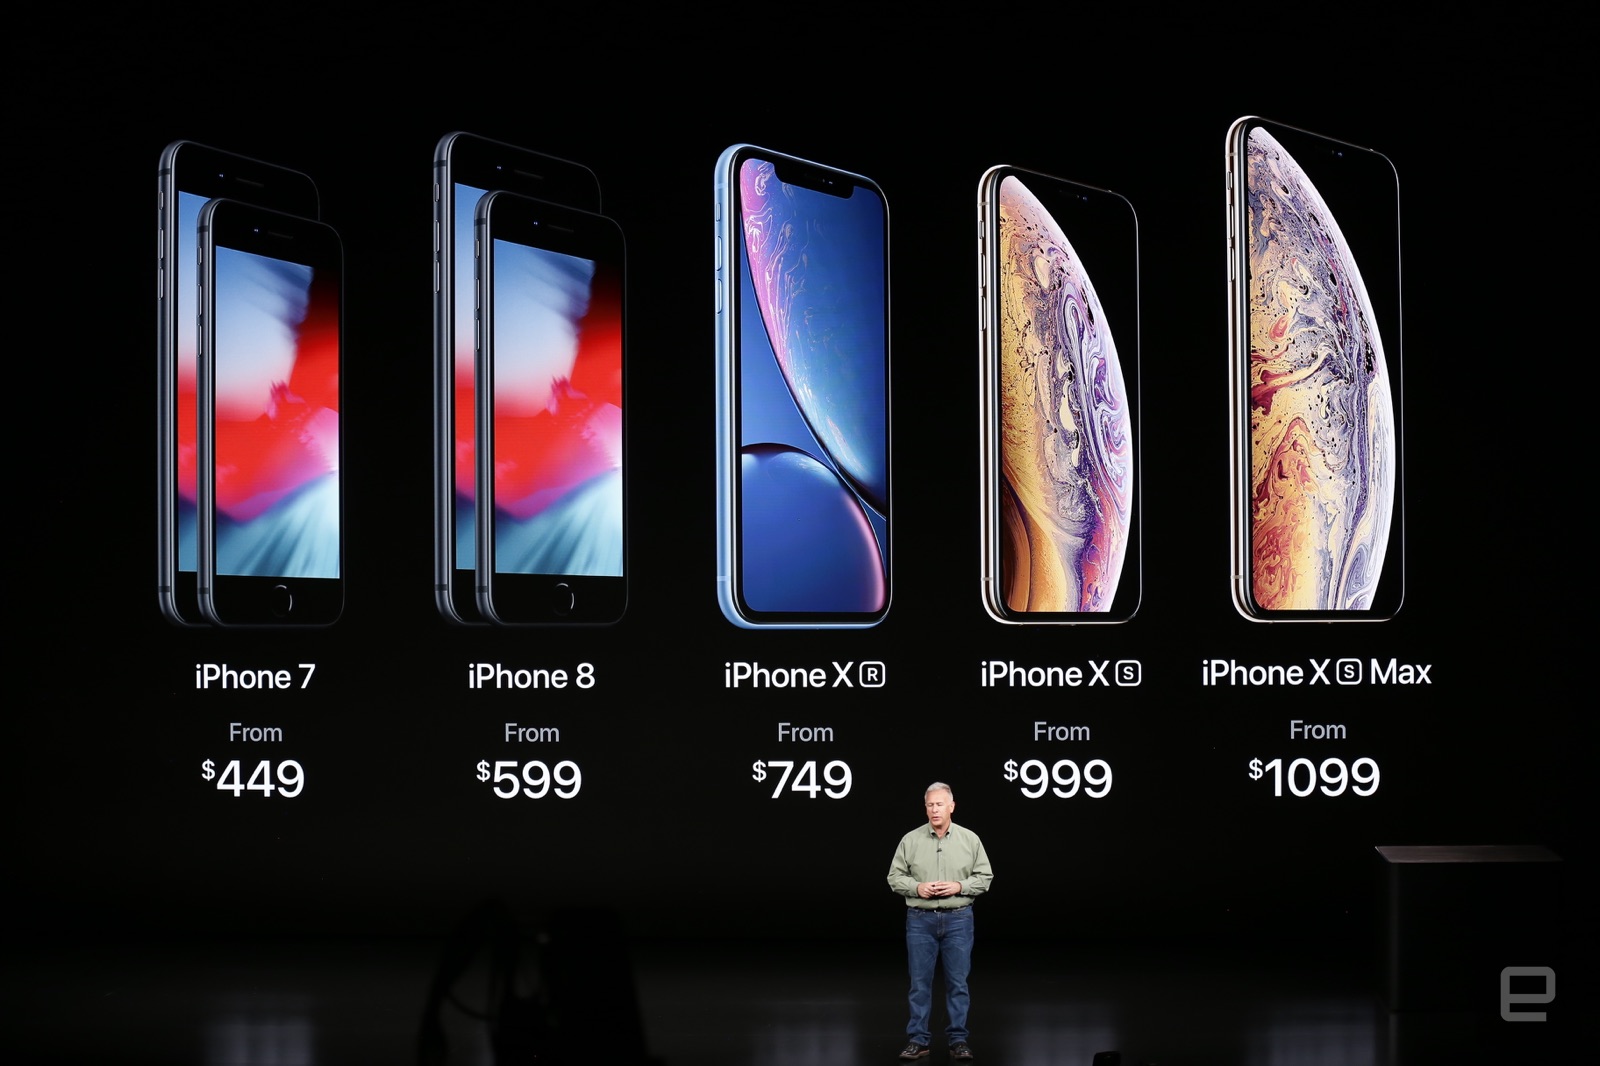 The biggest announcements from Apple's iPhone Xs event